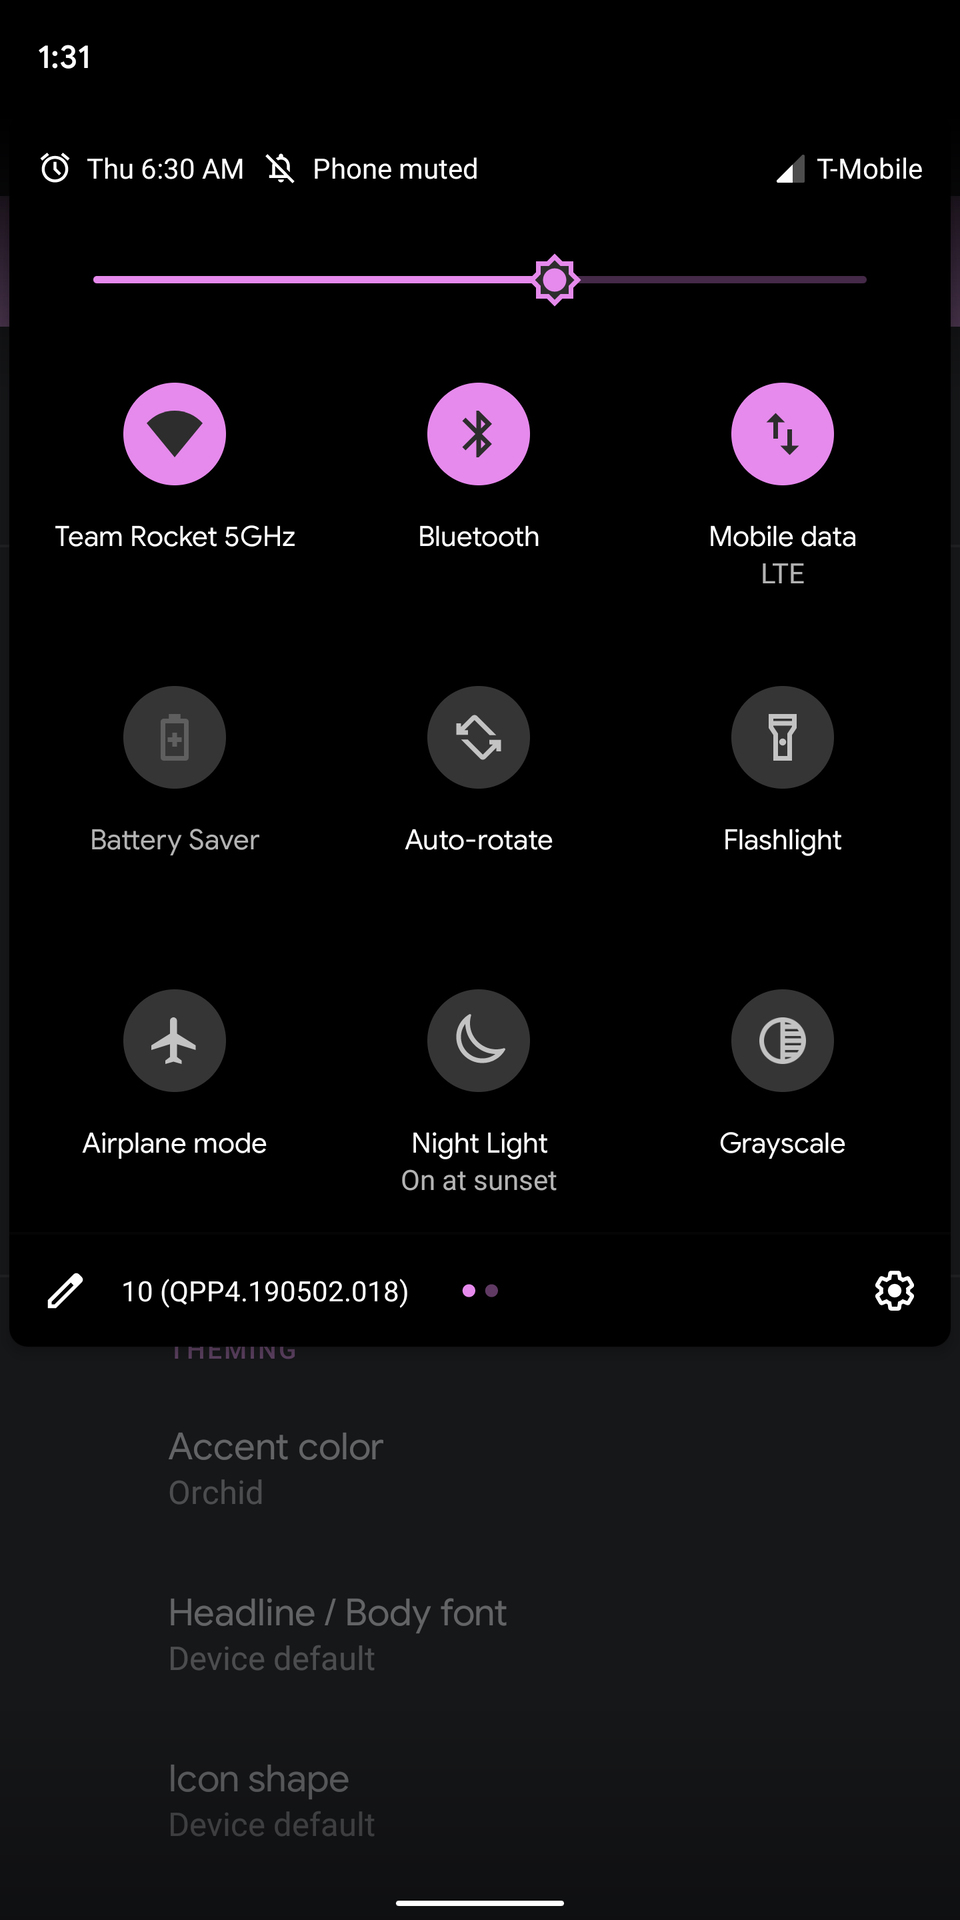 Android Q Beta 4 Orchid Accent Color